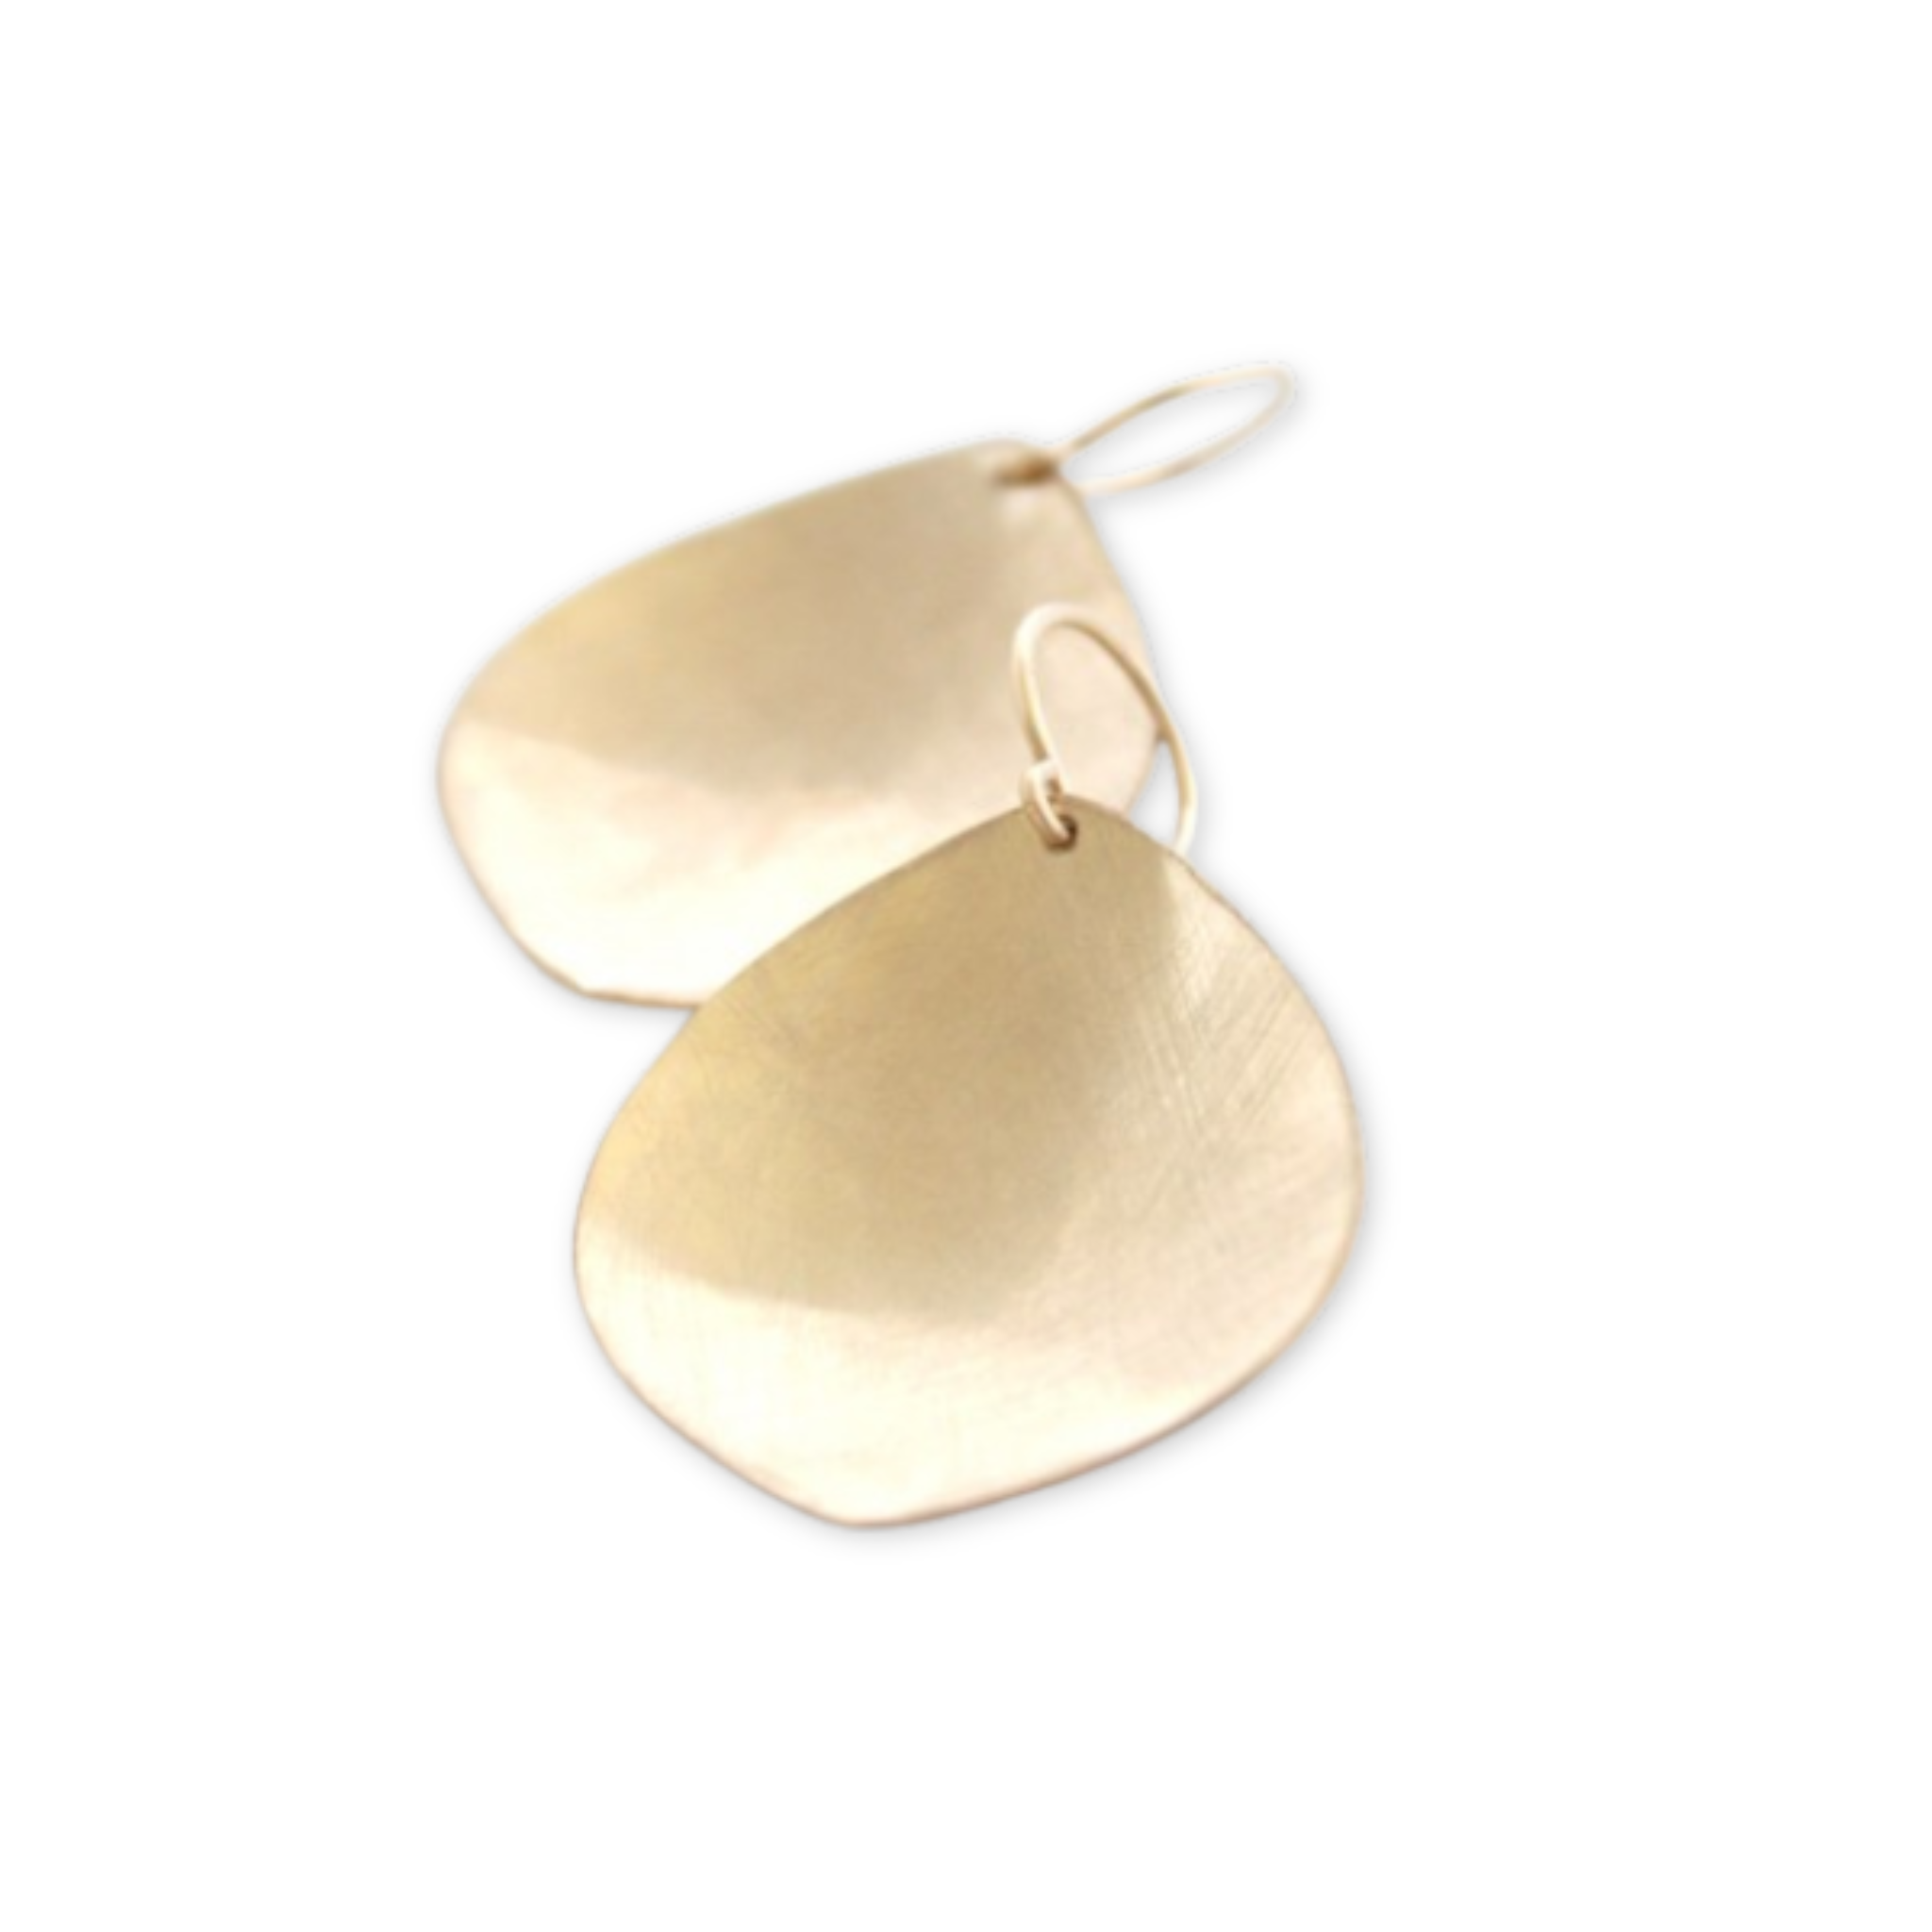 a pair of gold earrings with an organic leaf shape